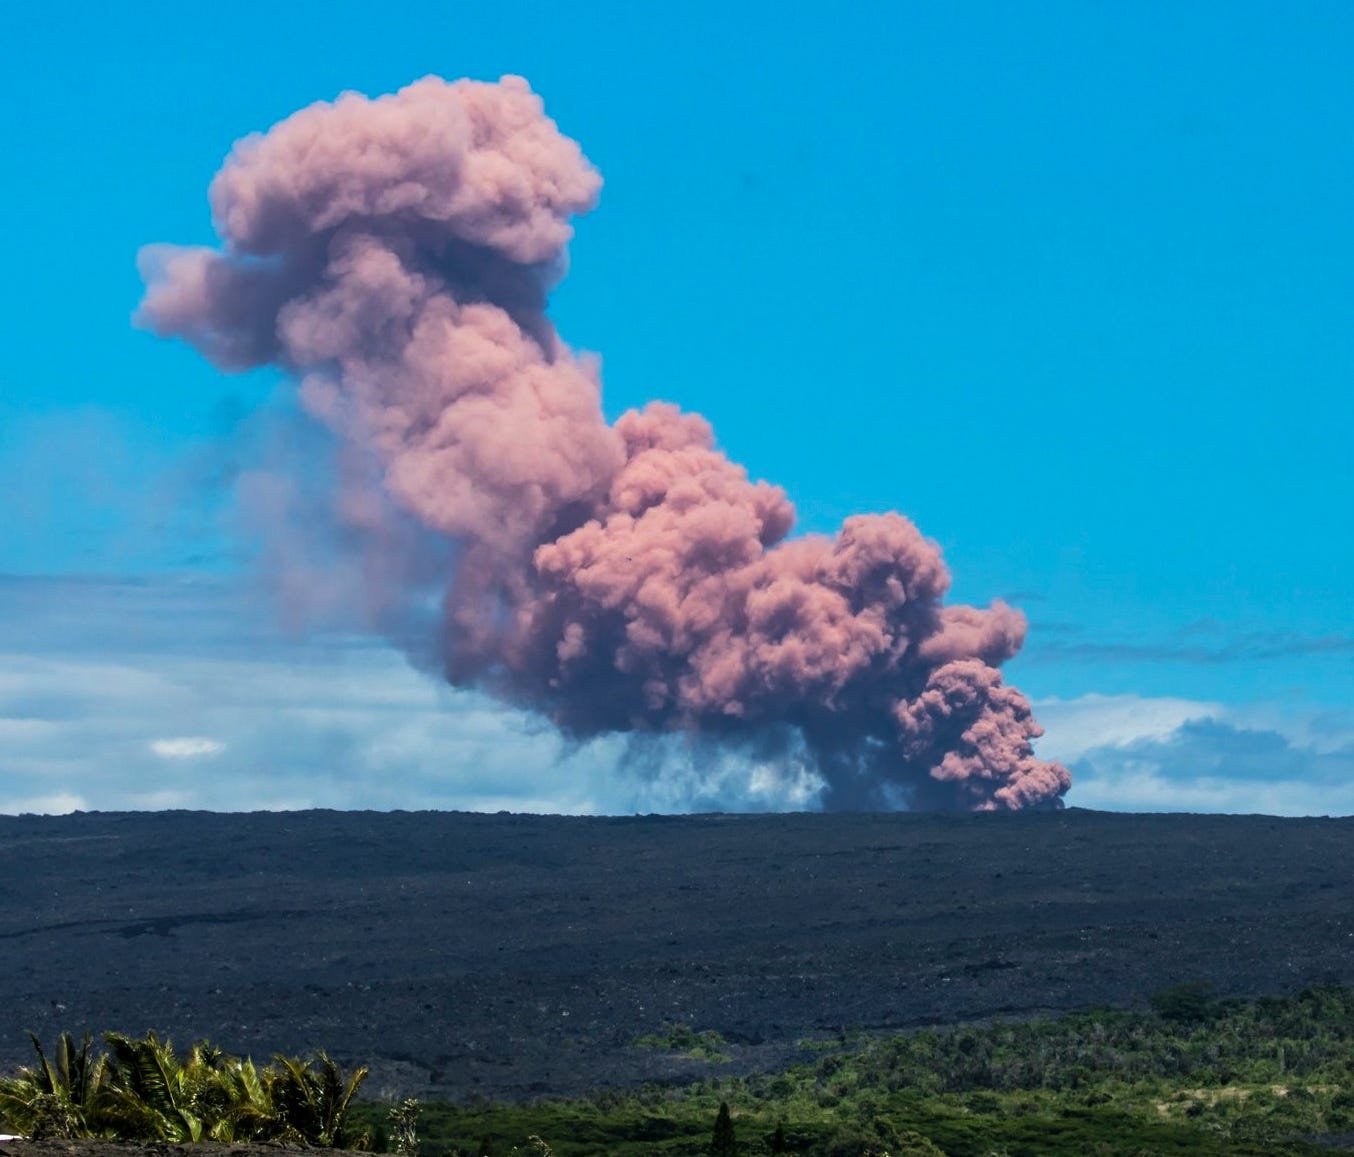 In this photo provided by Janice Wei, an ash plume rises above the Kilauea volcano on Hawaii's Big Island on May 3, 2018.